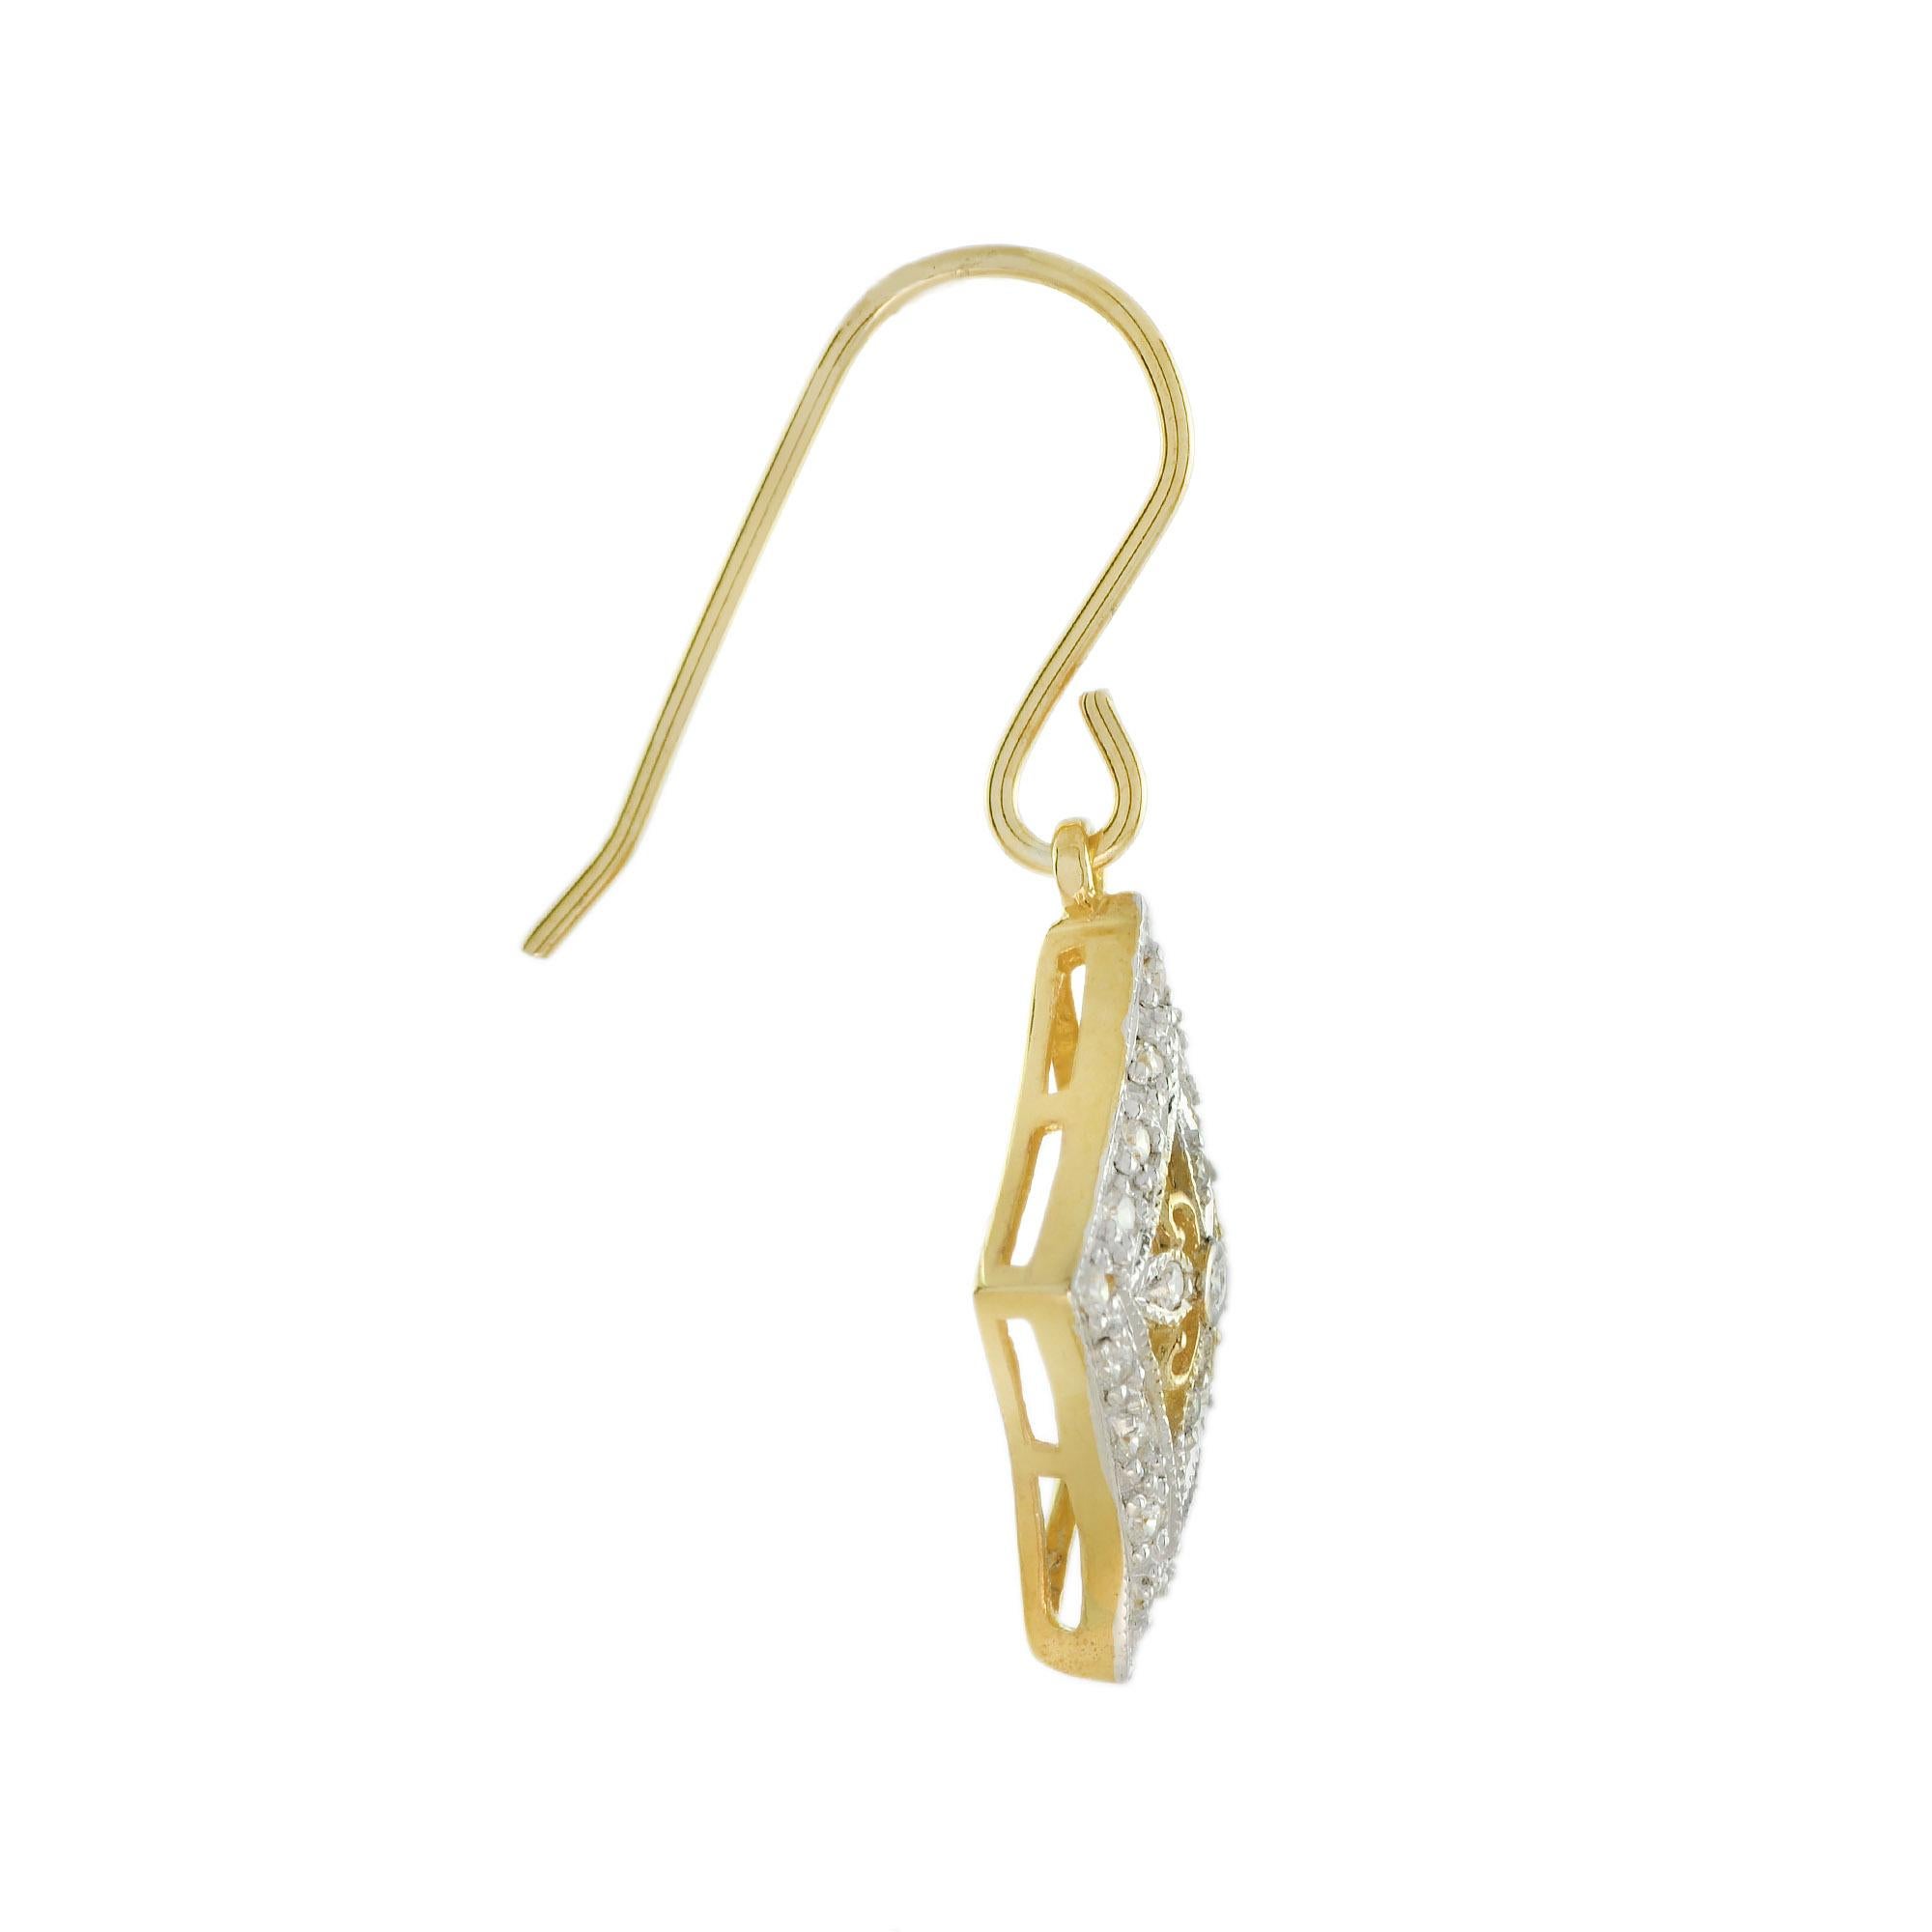 Vintage design feminine earrings of 14k yellow gold with white rhodium to highlight the diamonds. The diamond shaped outer border surrounds a central floral cluster design, all suspended from a French wire earrings to catch the light with your every